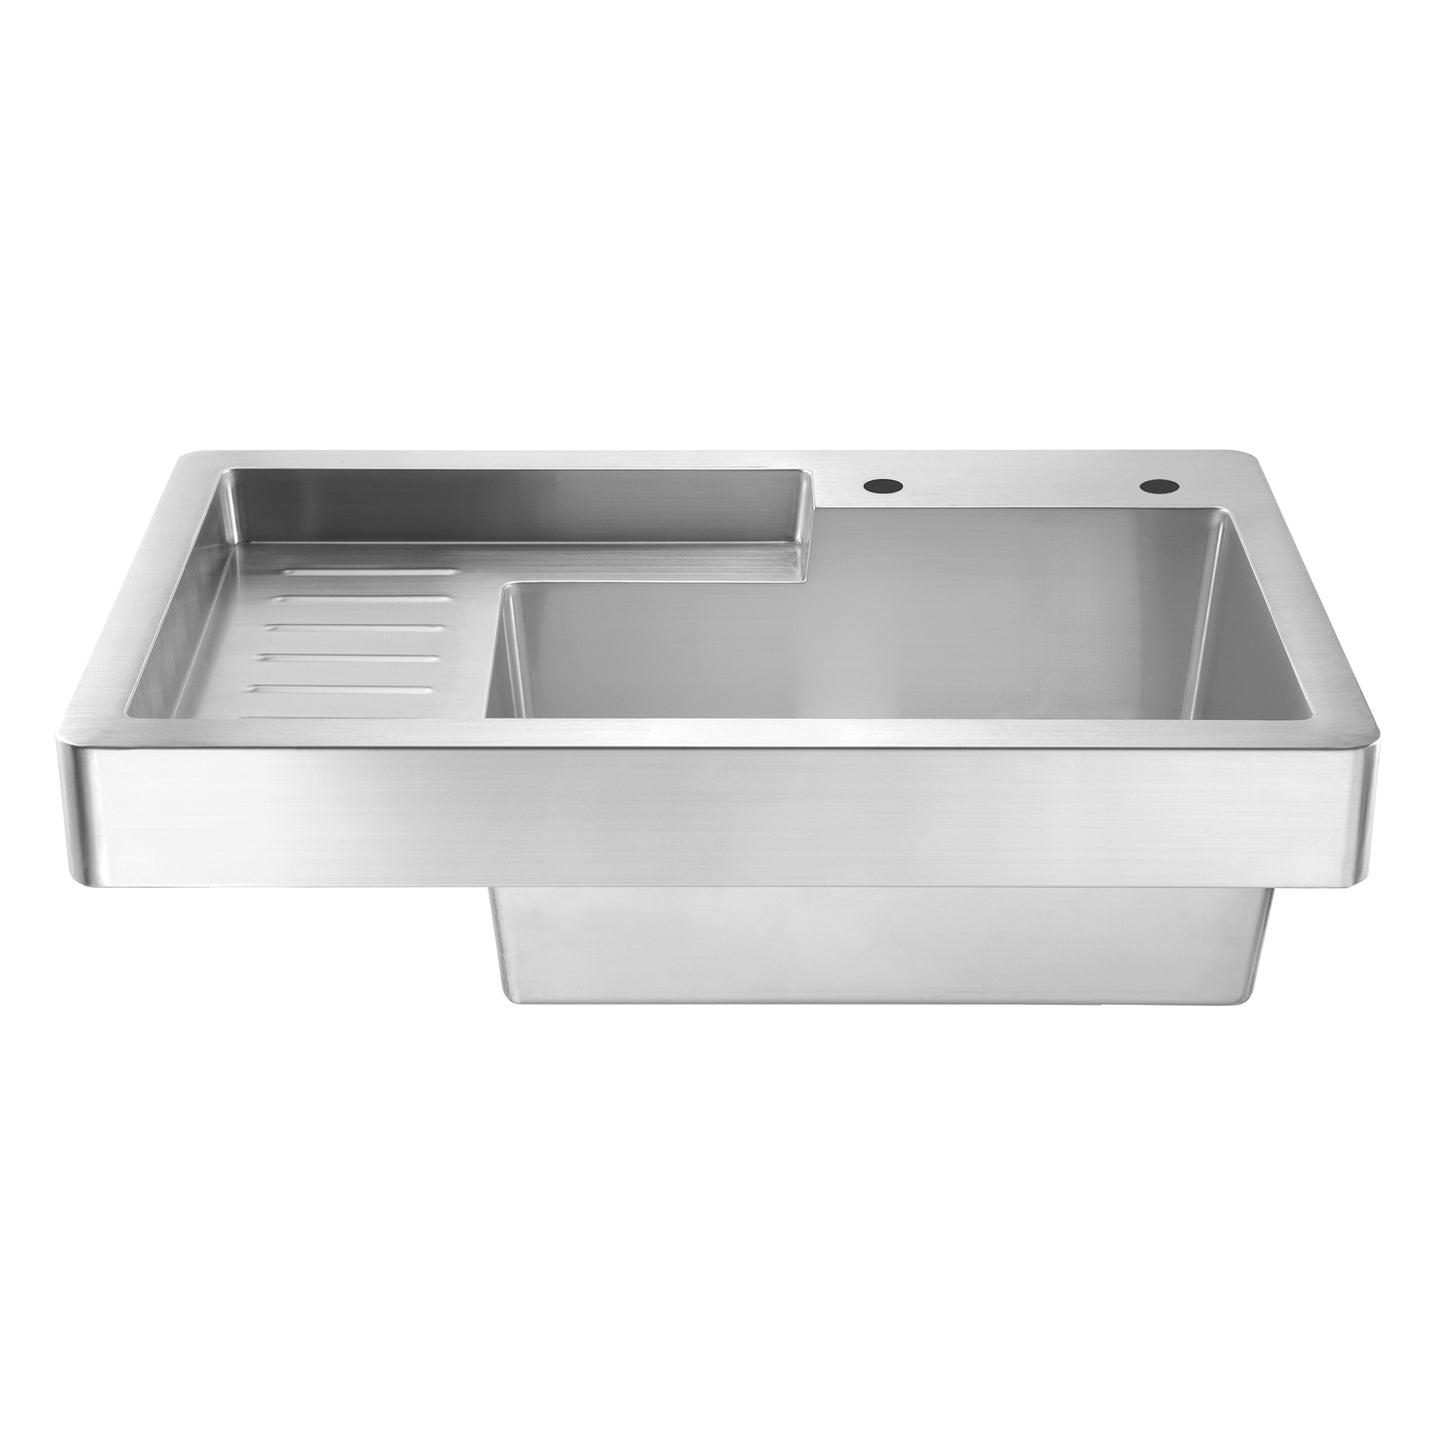 Brushed Stainless Steel Single Bowl Drop In Utility Sink with Drainboard